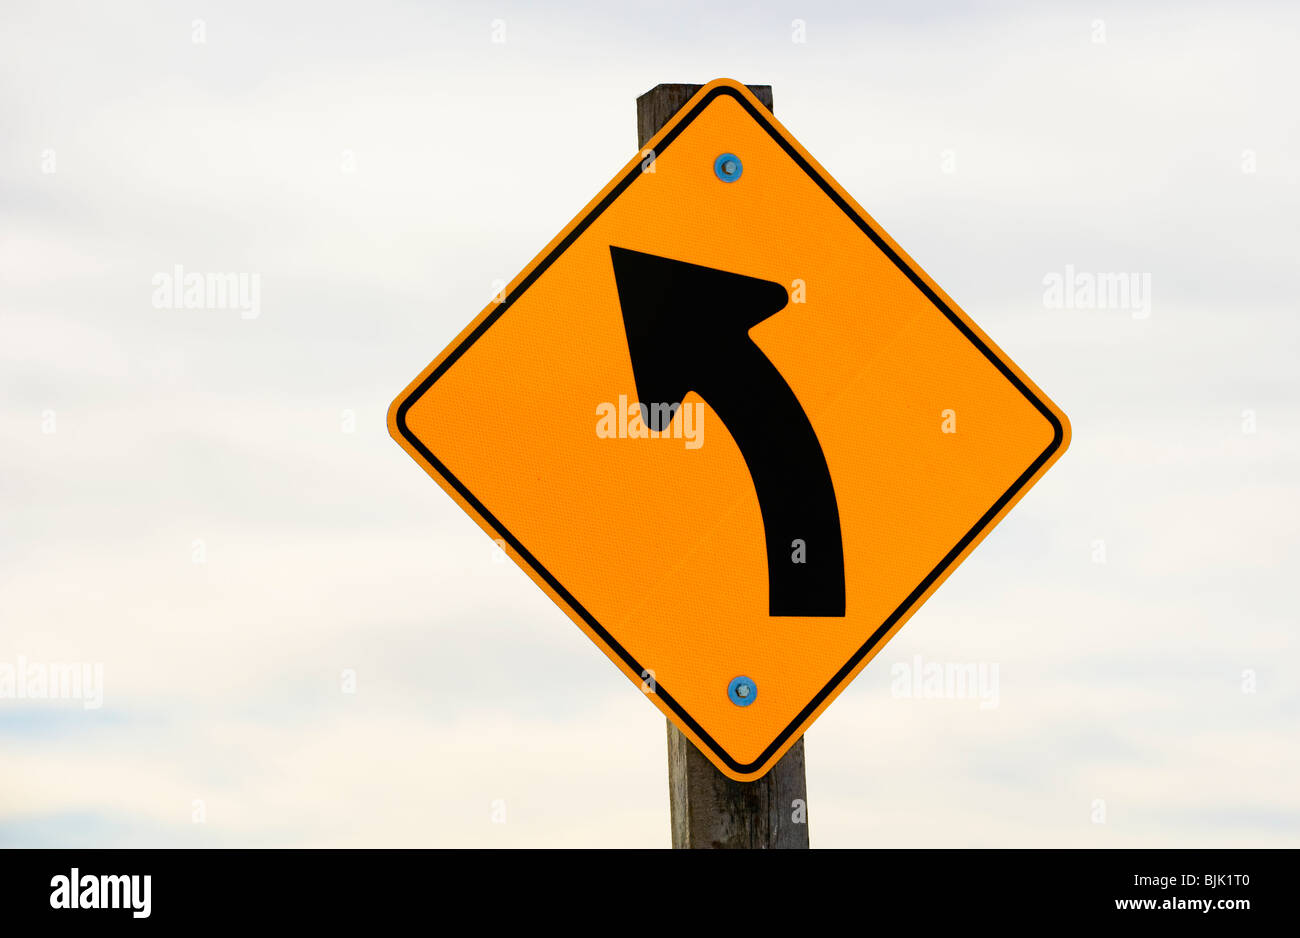 A highway sign warning of an approaching curve. Stock Photo